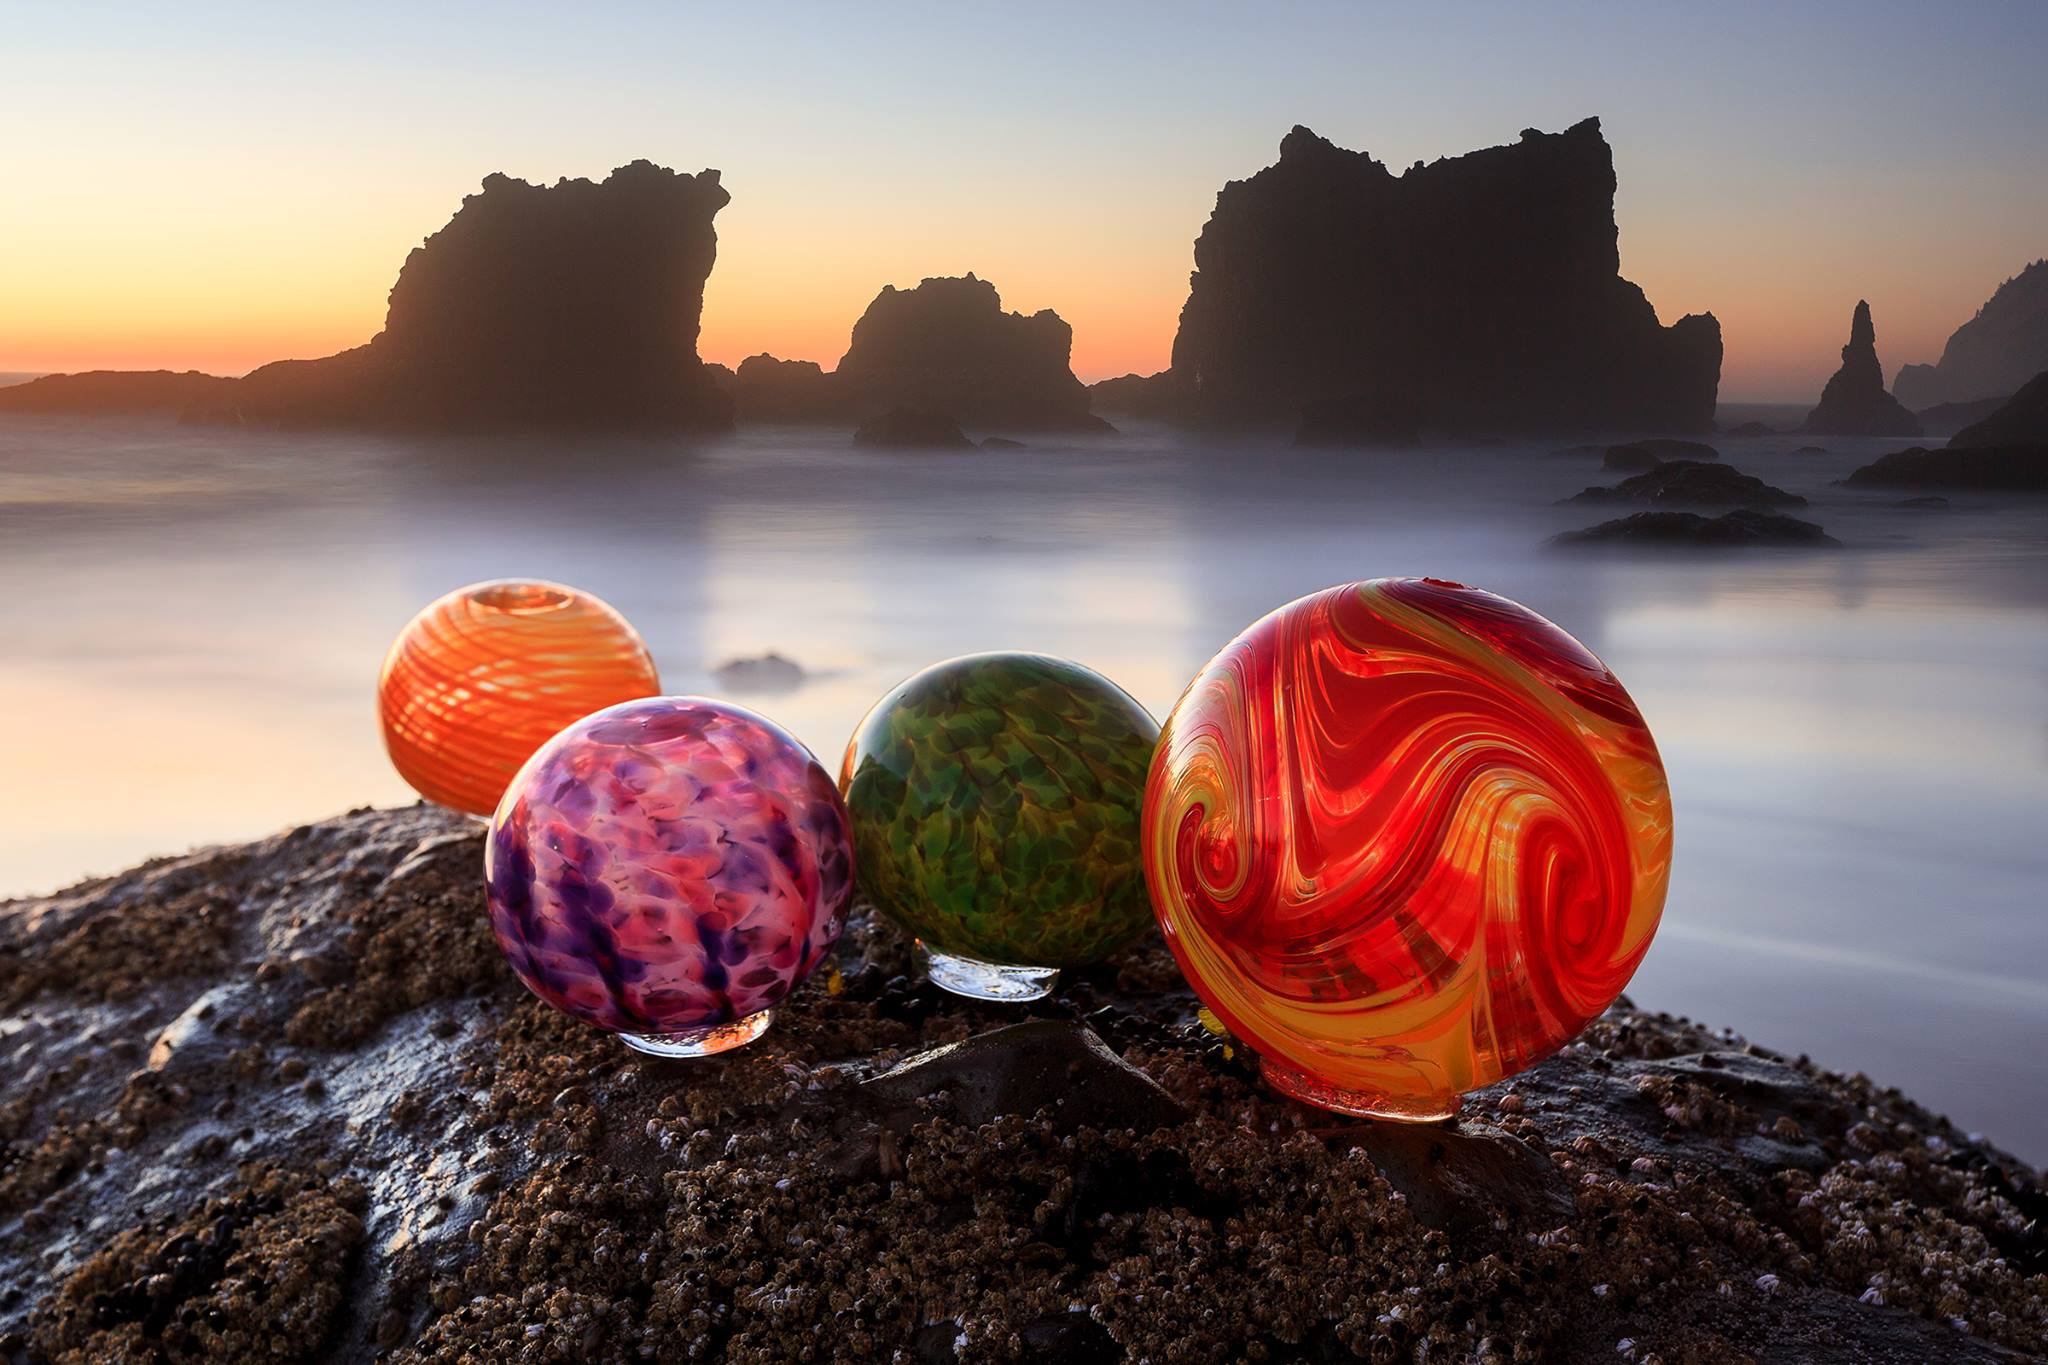 Lincoln City to Hide Over 100 Glass Floats on its Beaches This May